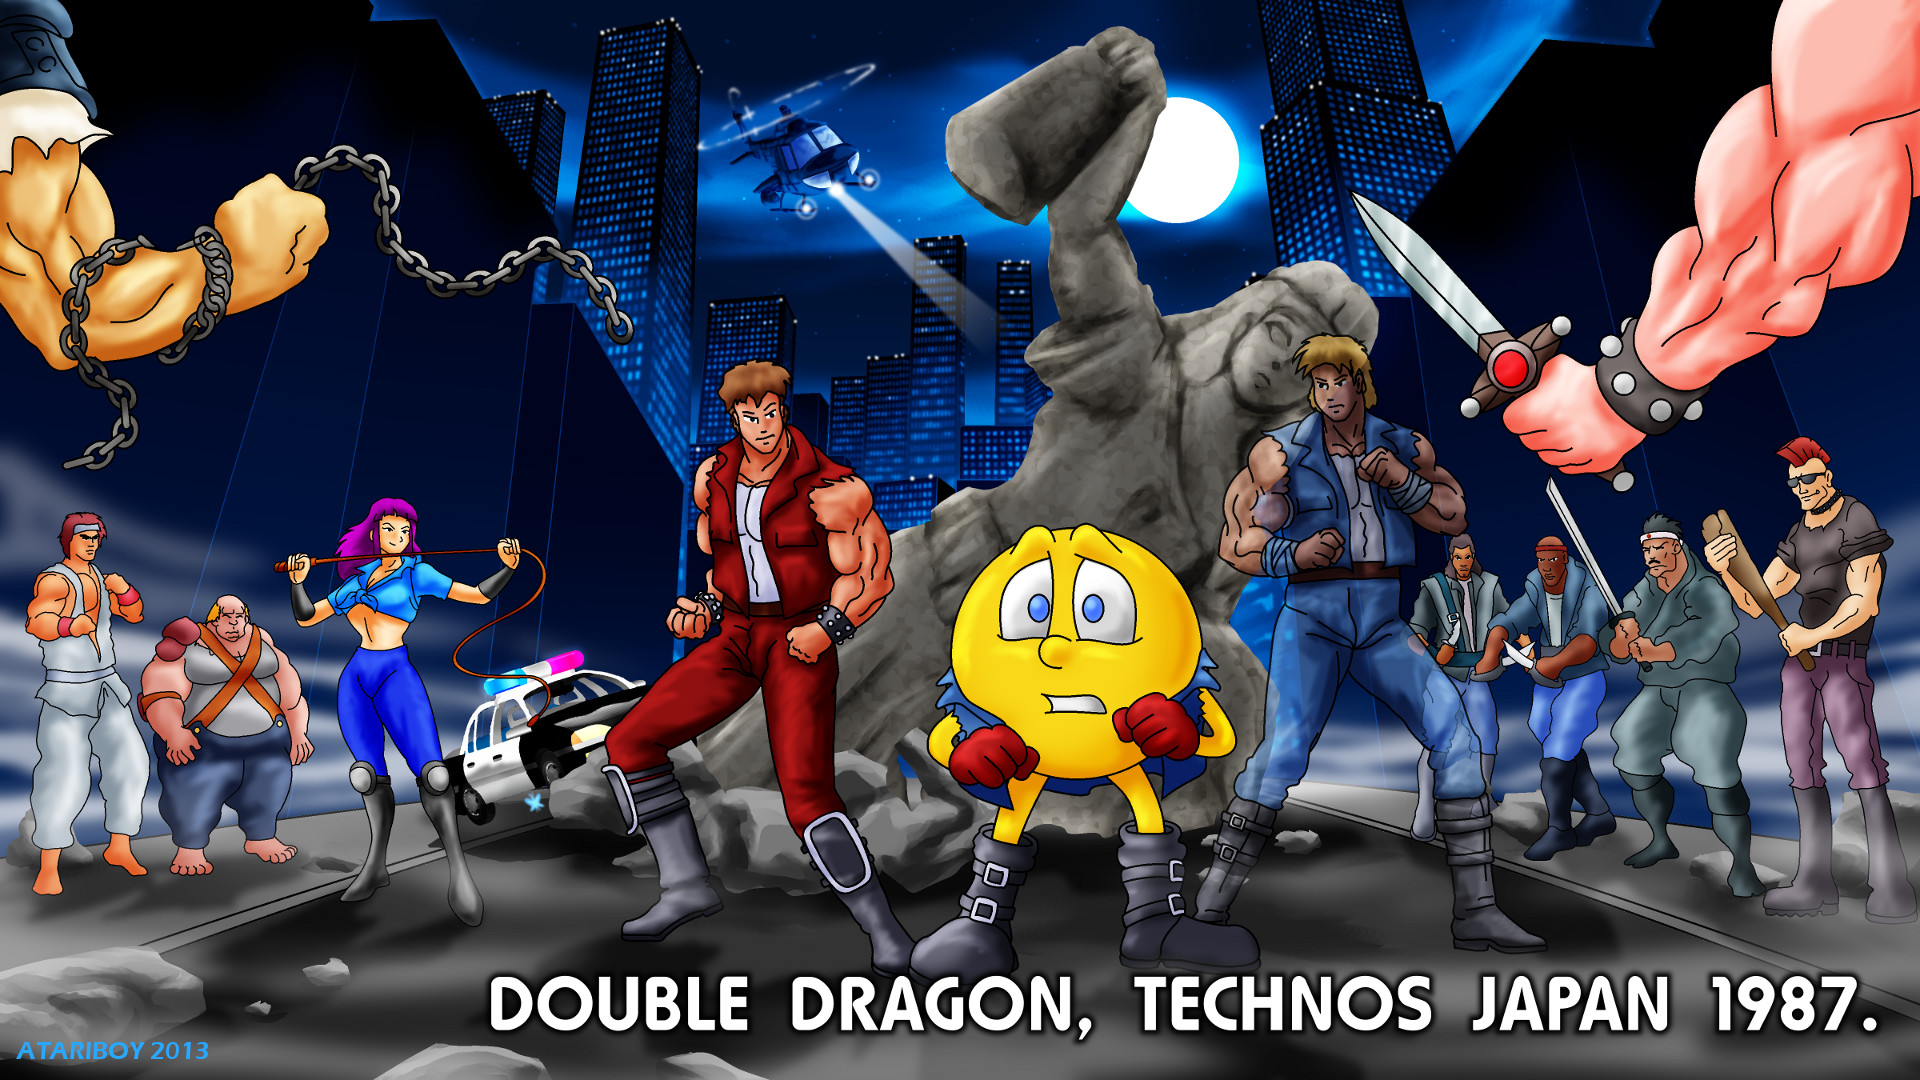 1920x1080 ... Pacman Fanfic - Double Dragon 1987. by Atariboy2600